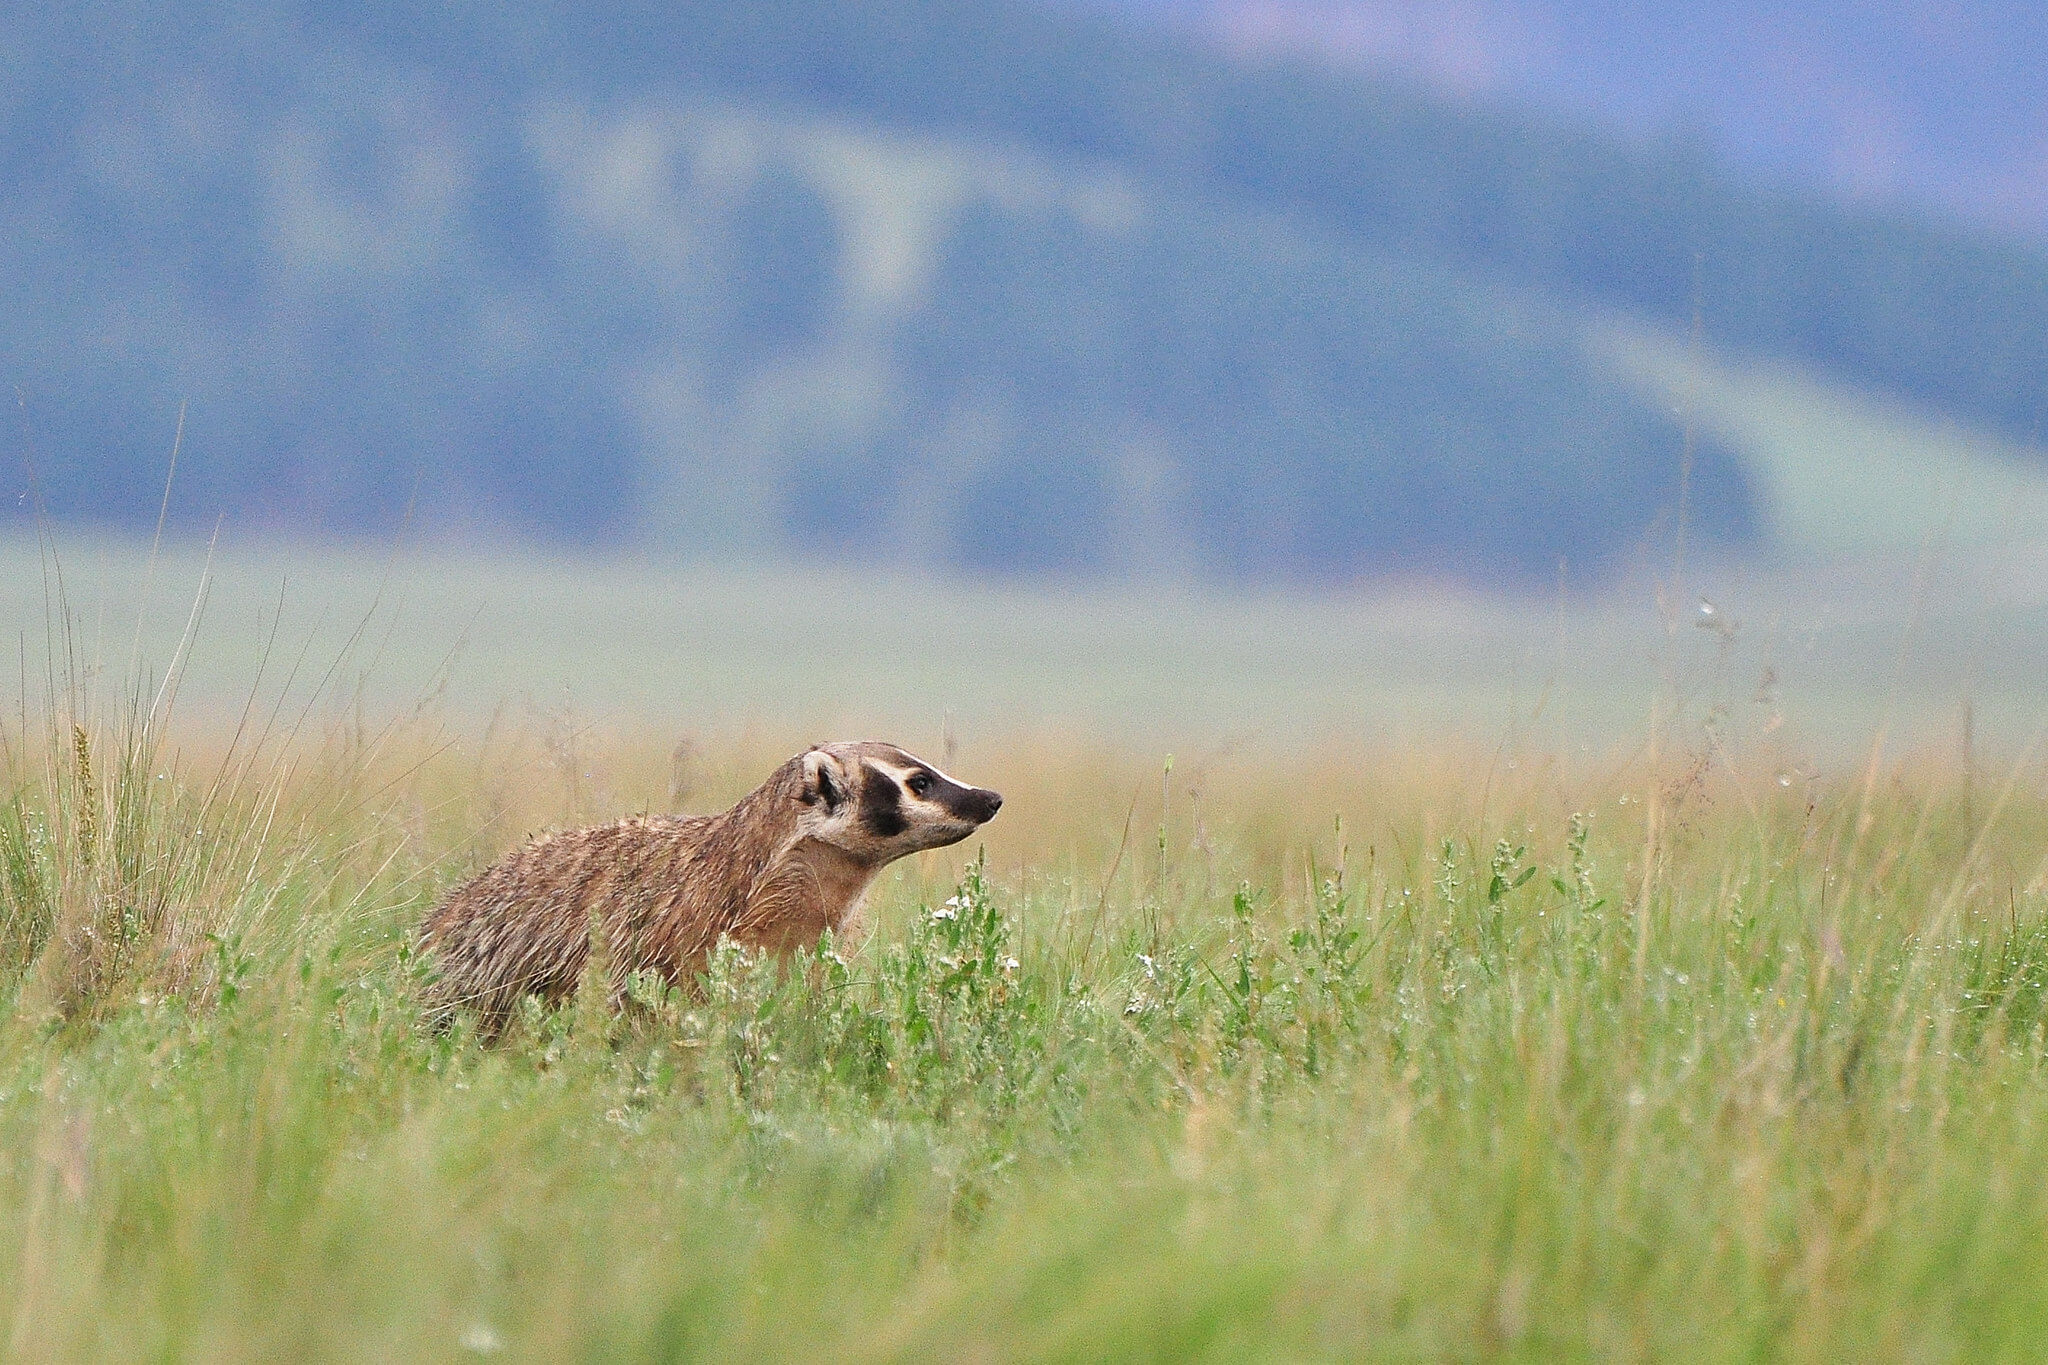 A badger in a field.